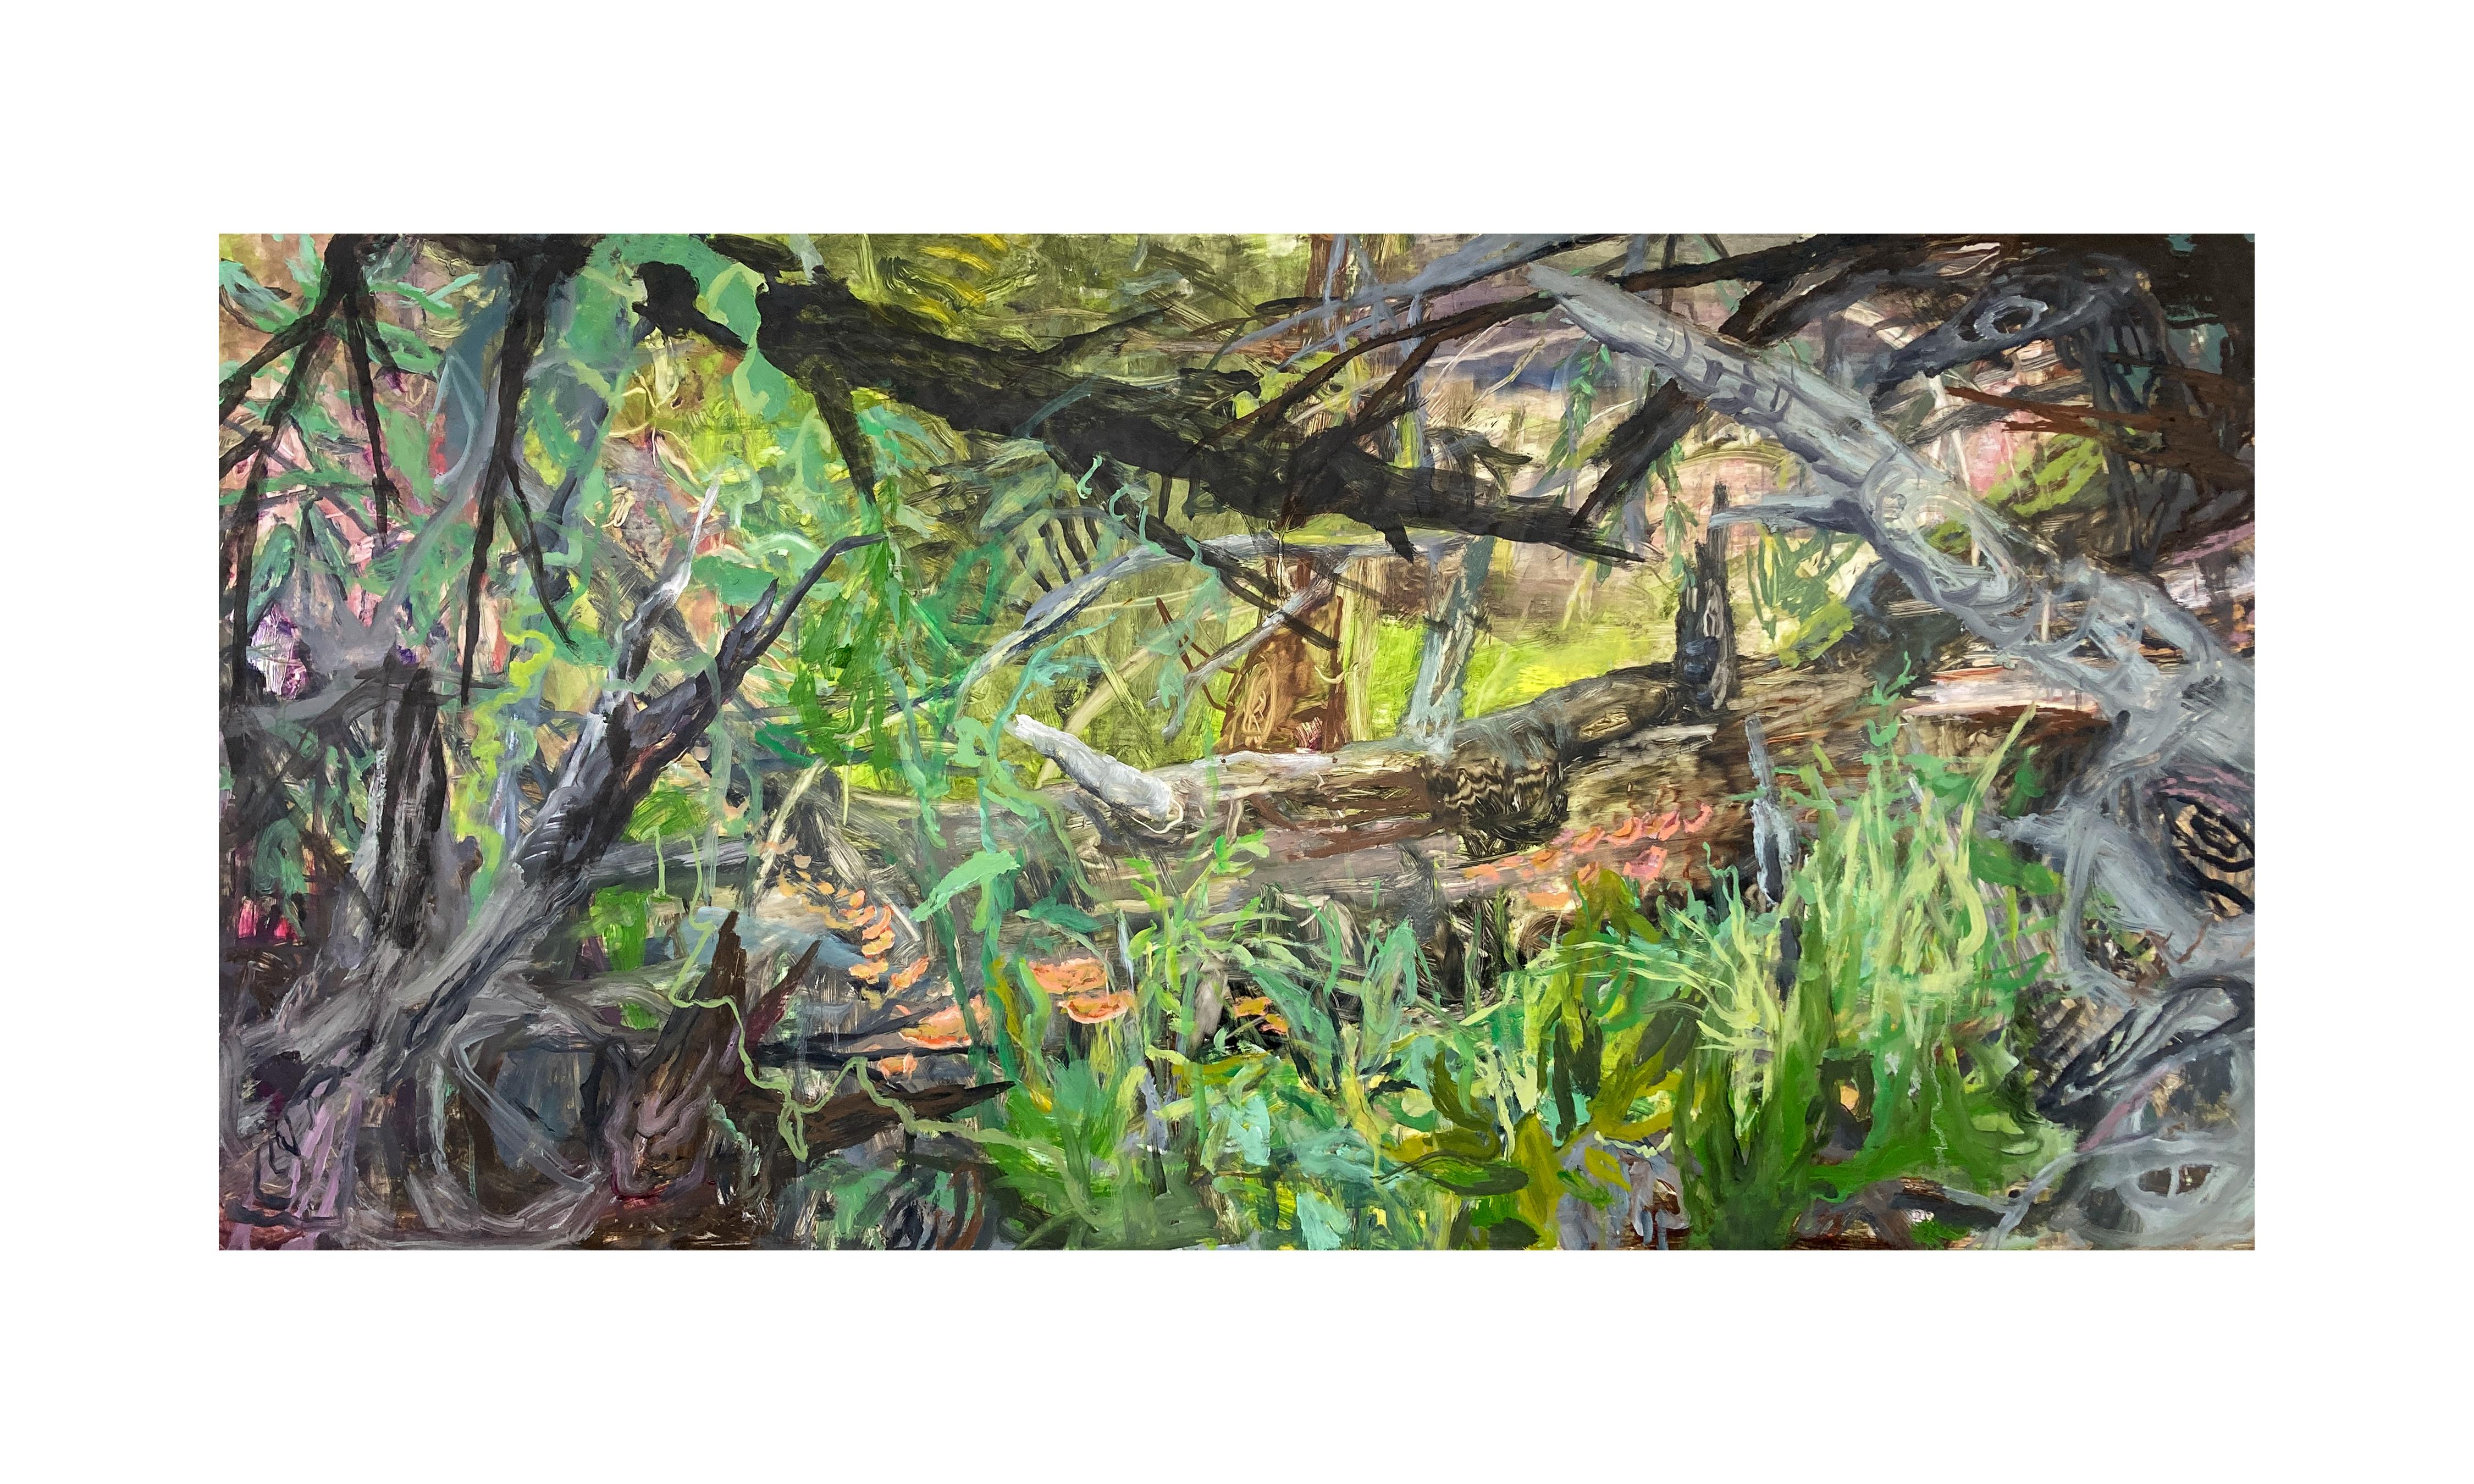 LATE SUMMER FORAGE - Oil on Yupo Panel Painting of Plant Life in the Forest